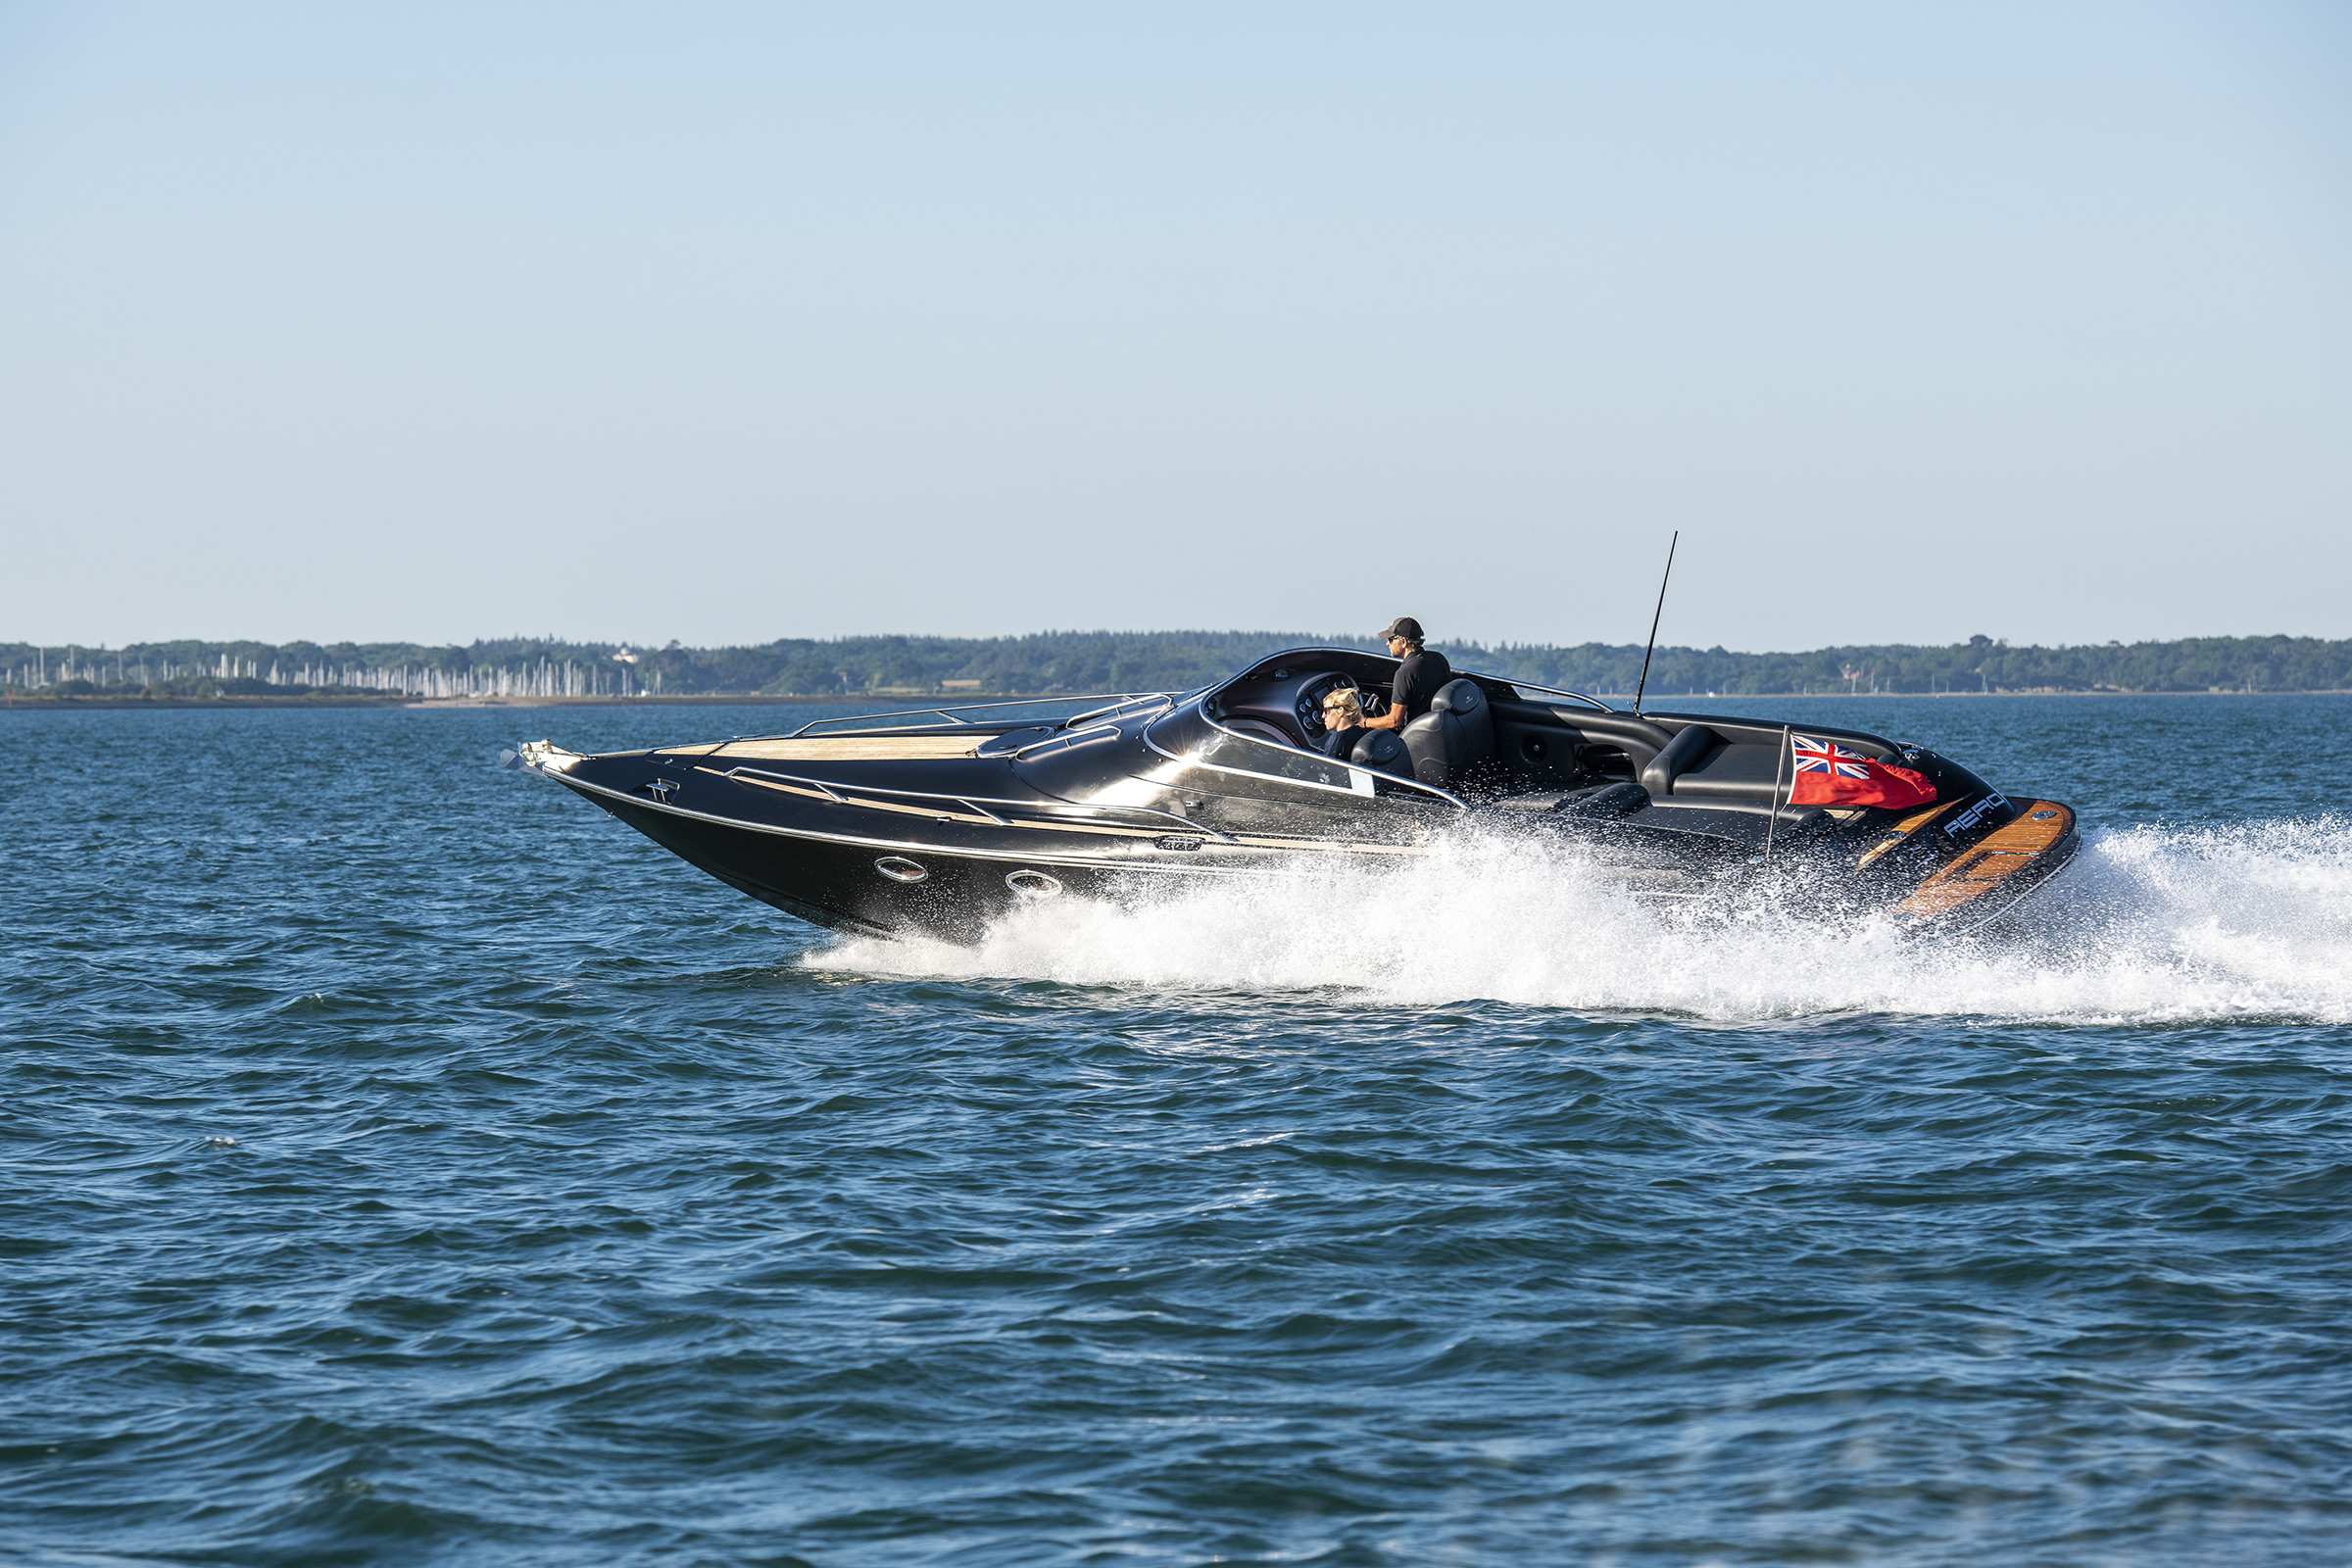 Visit the Isle of Wights with AERO Power Boat Charters Lymington